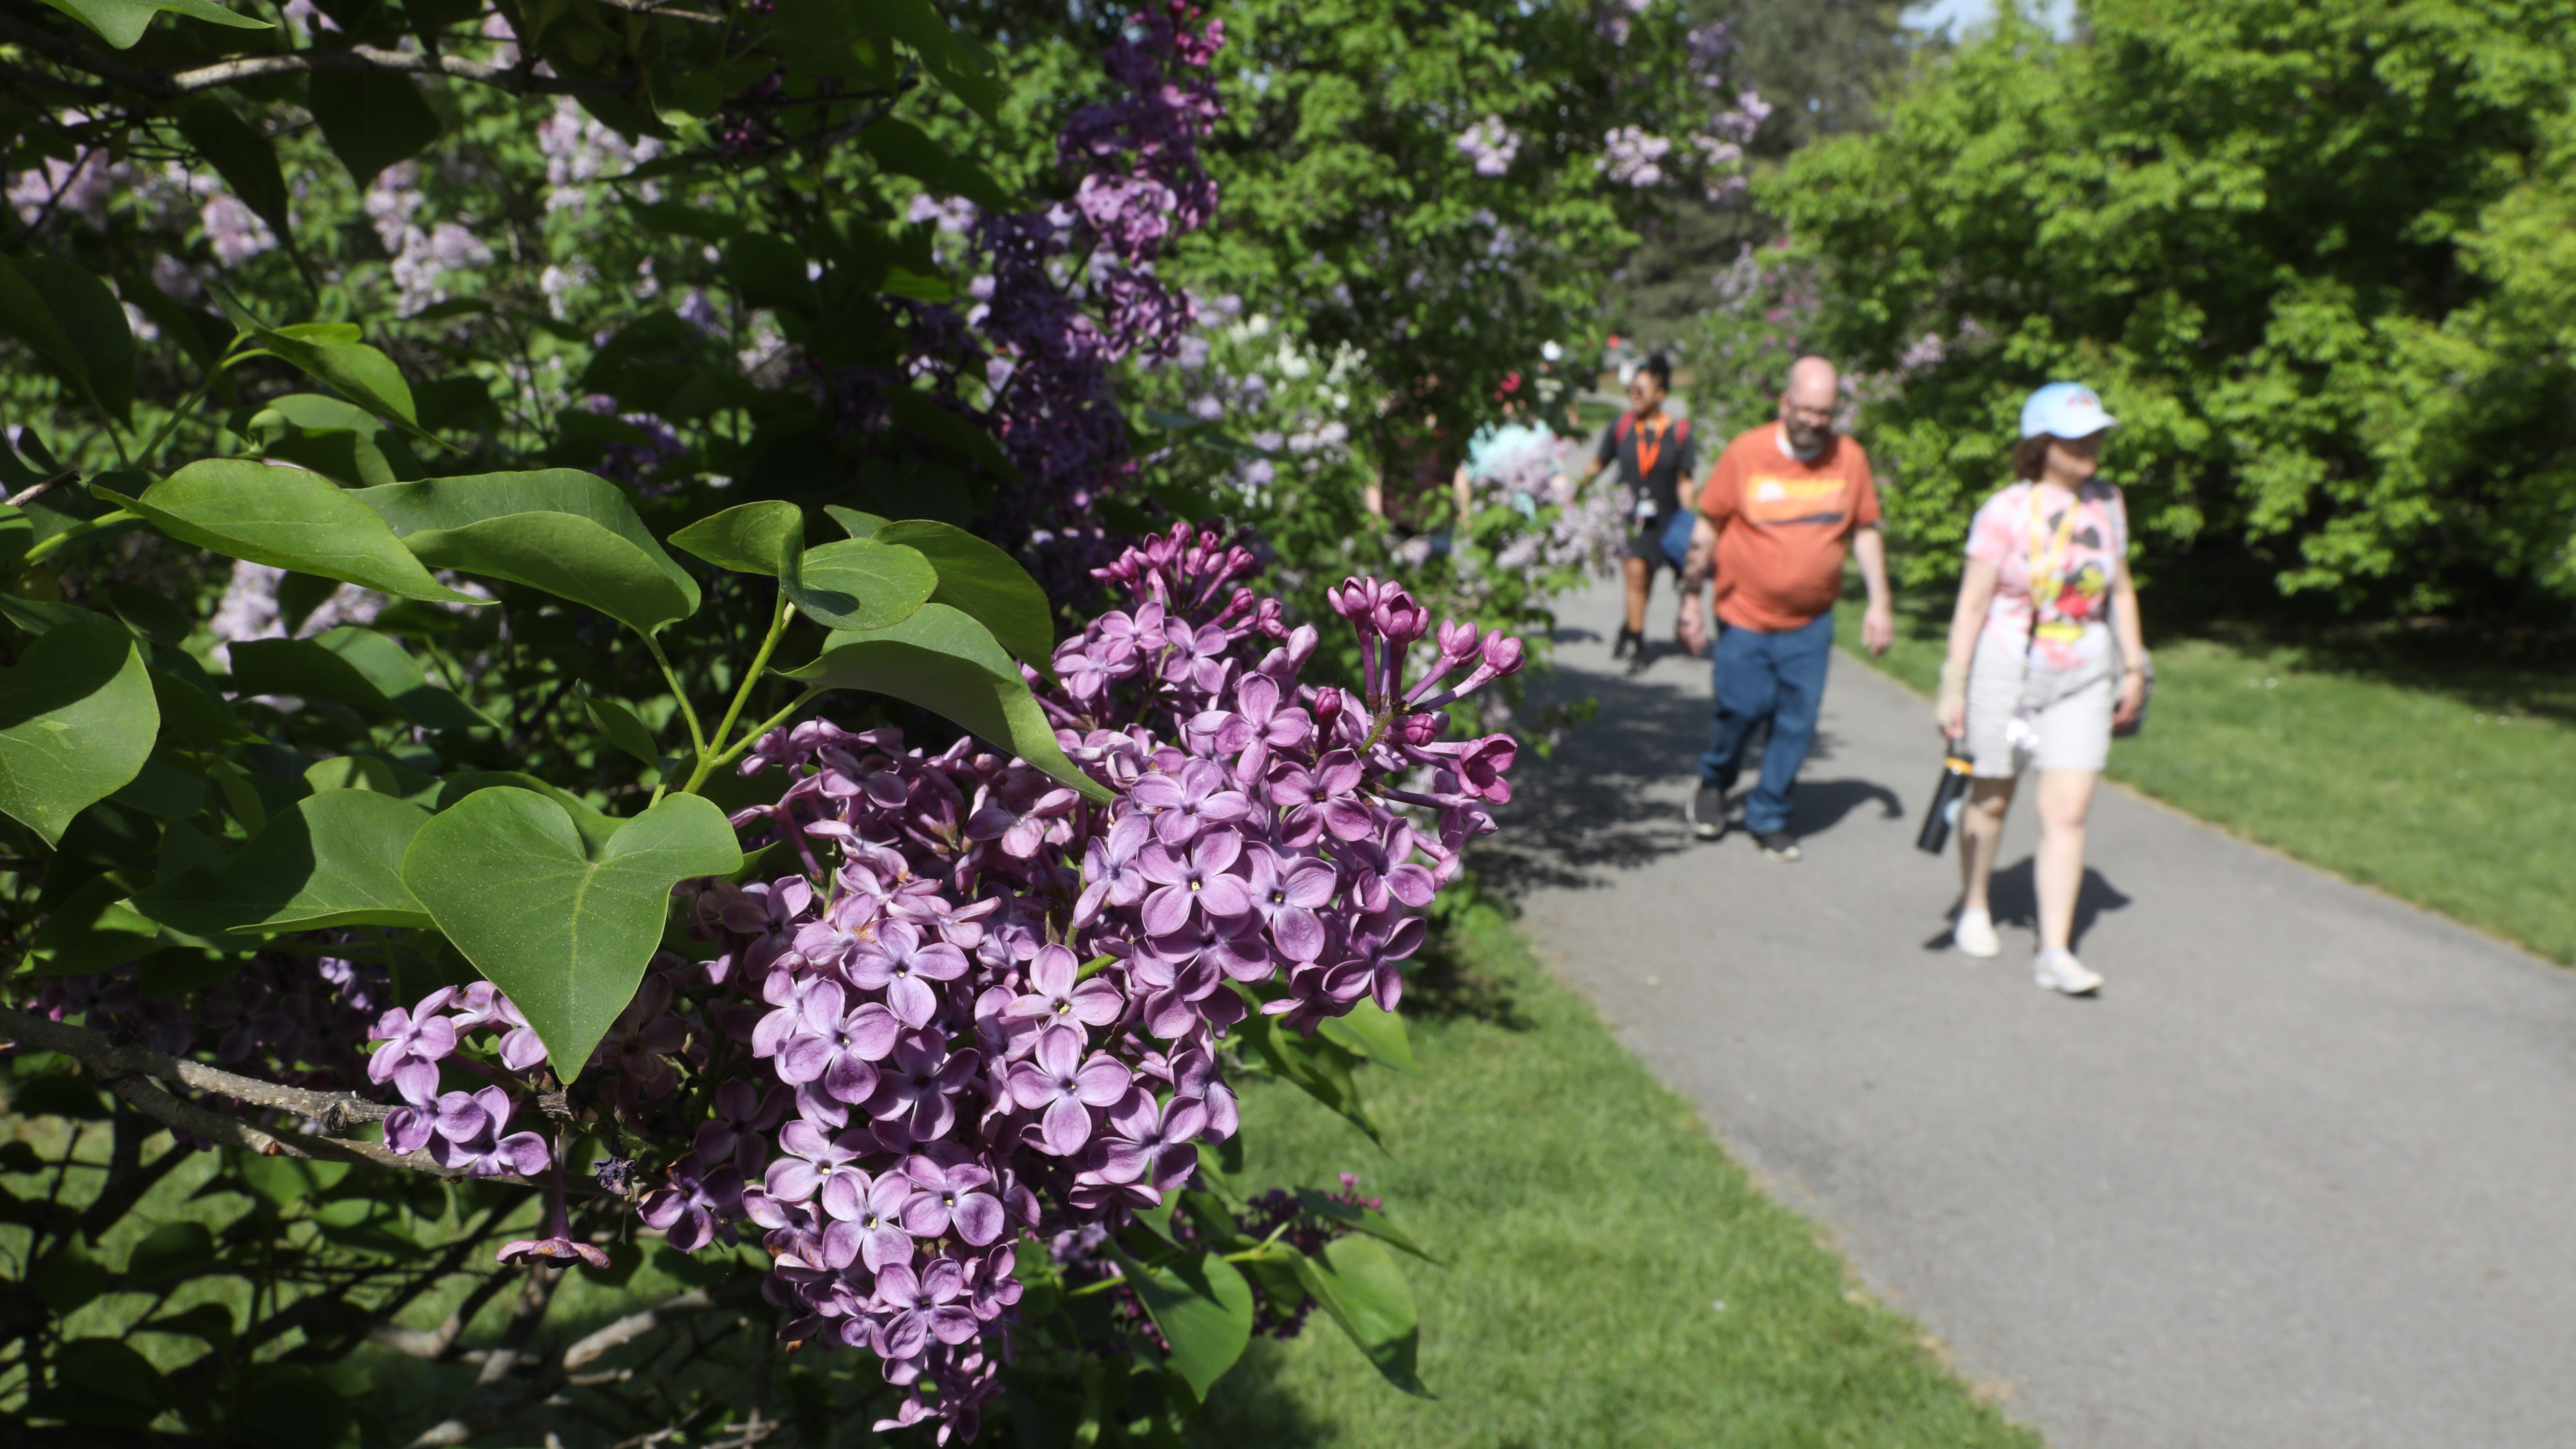 Will blooms be at peak for the Lilac Festival? Here's the prediction